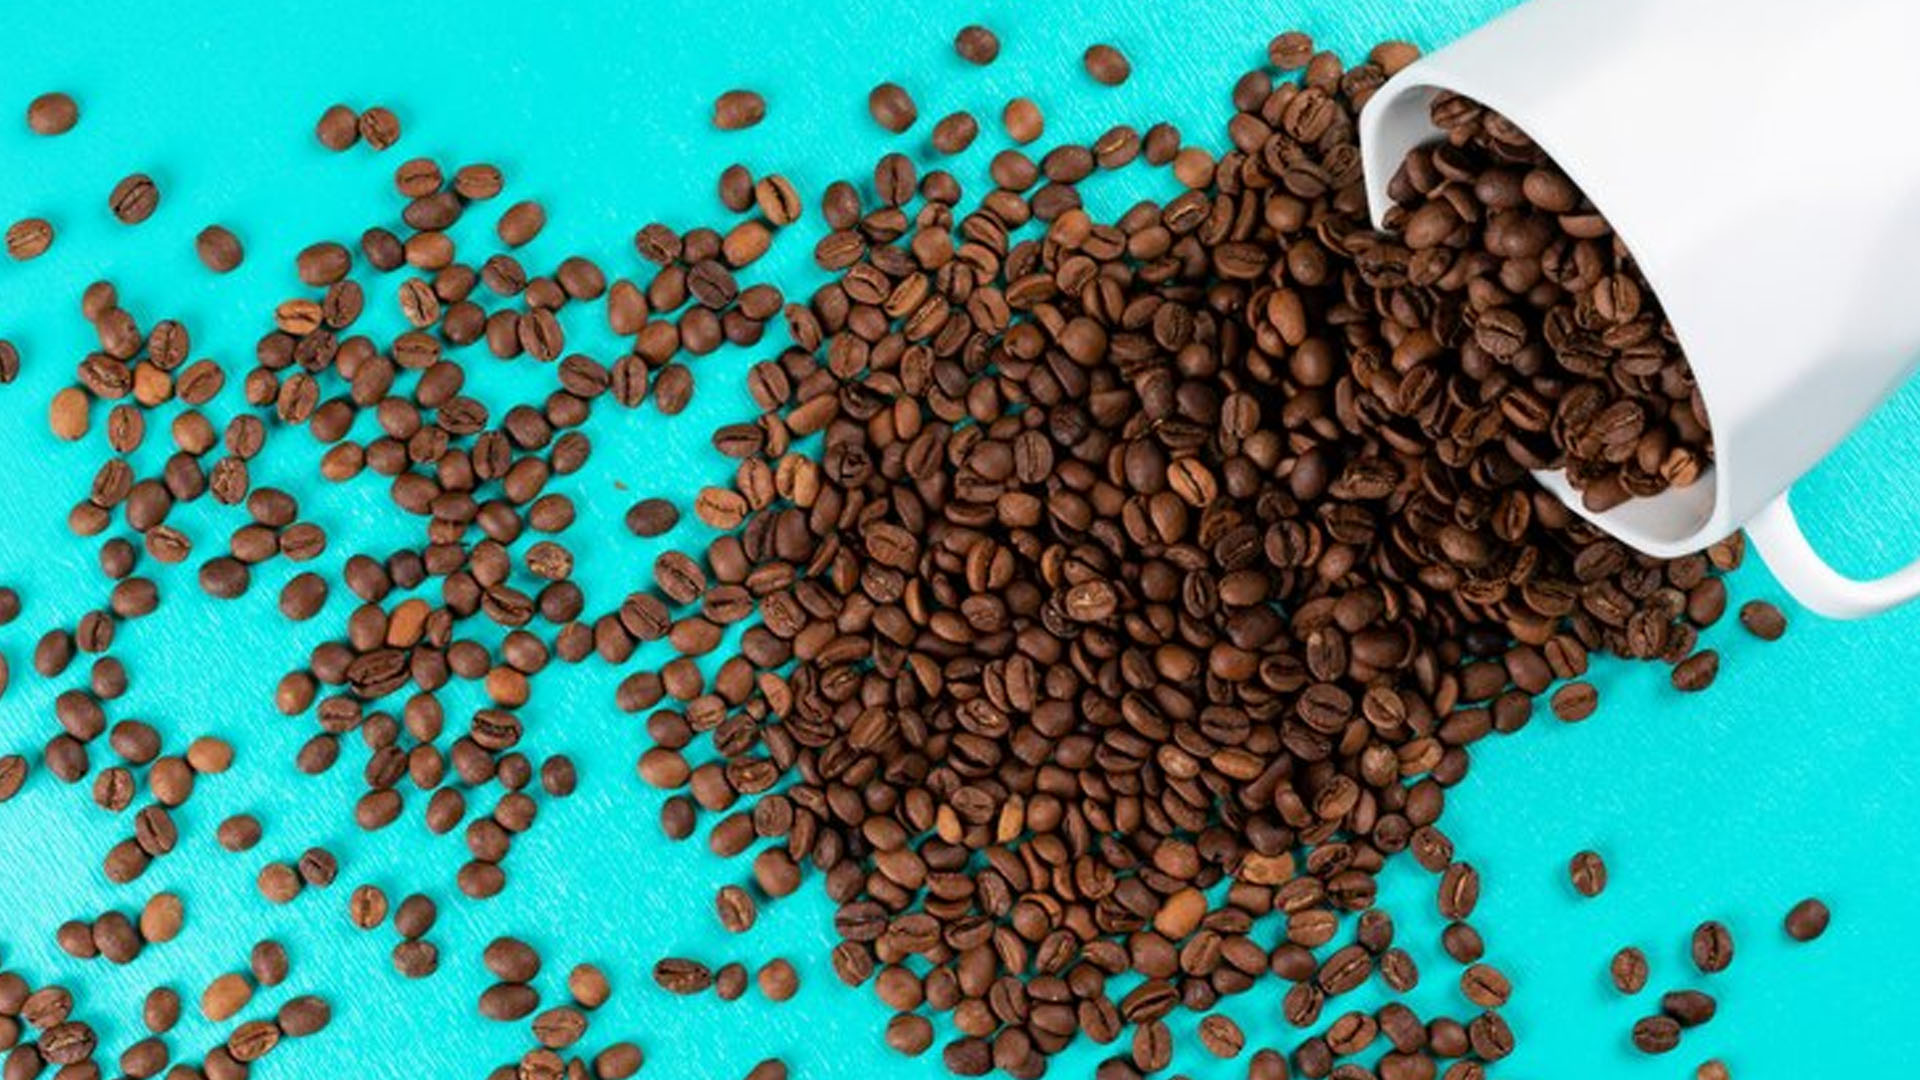 What Are The Health Benefits and Harmful Effects of Caffeine?